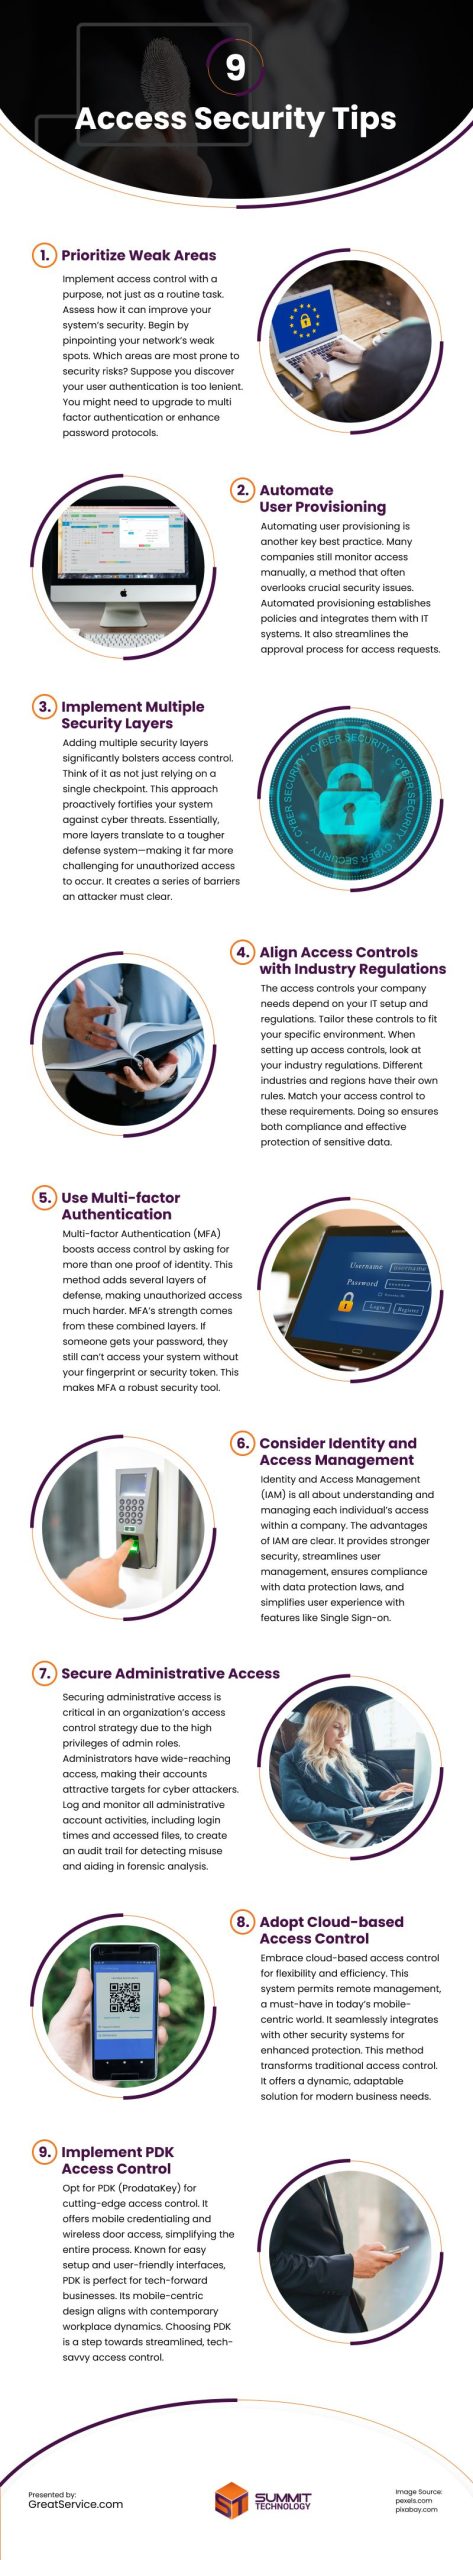 9 Access Security Tips Infographic